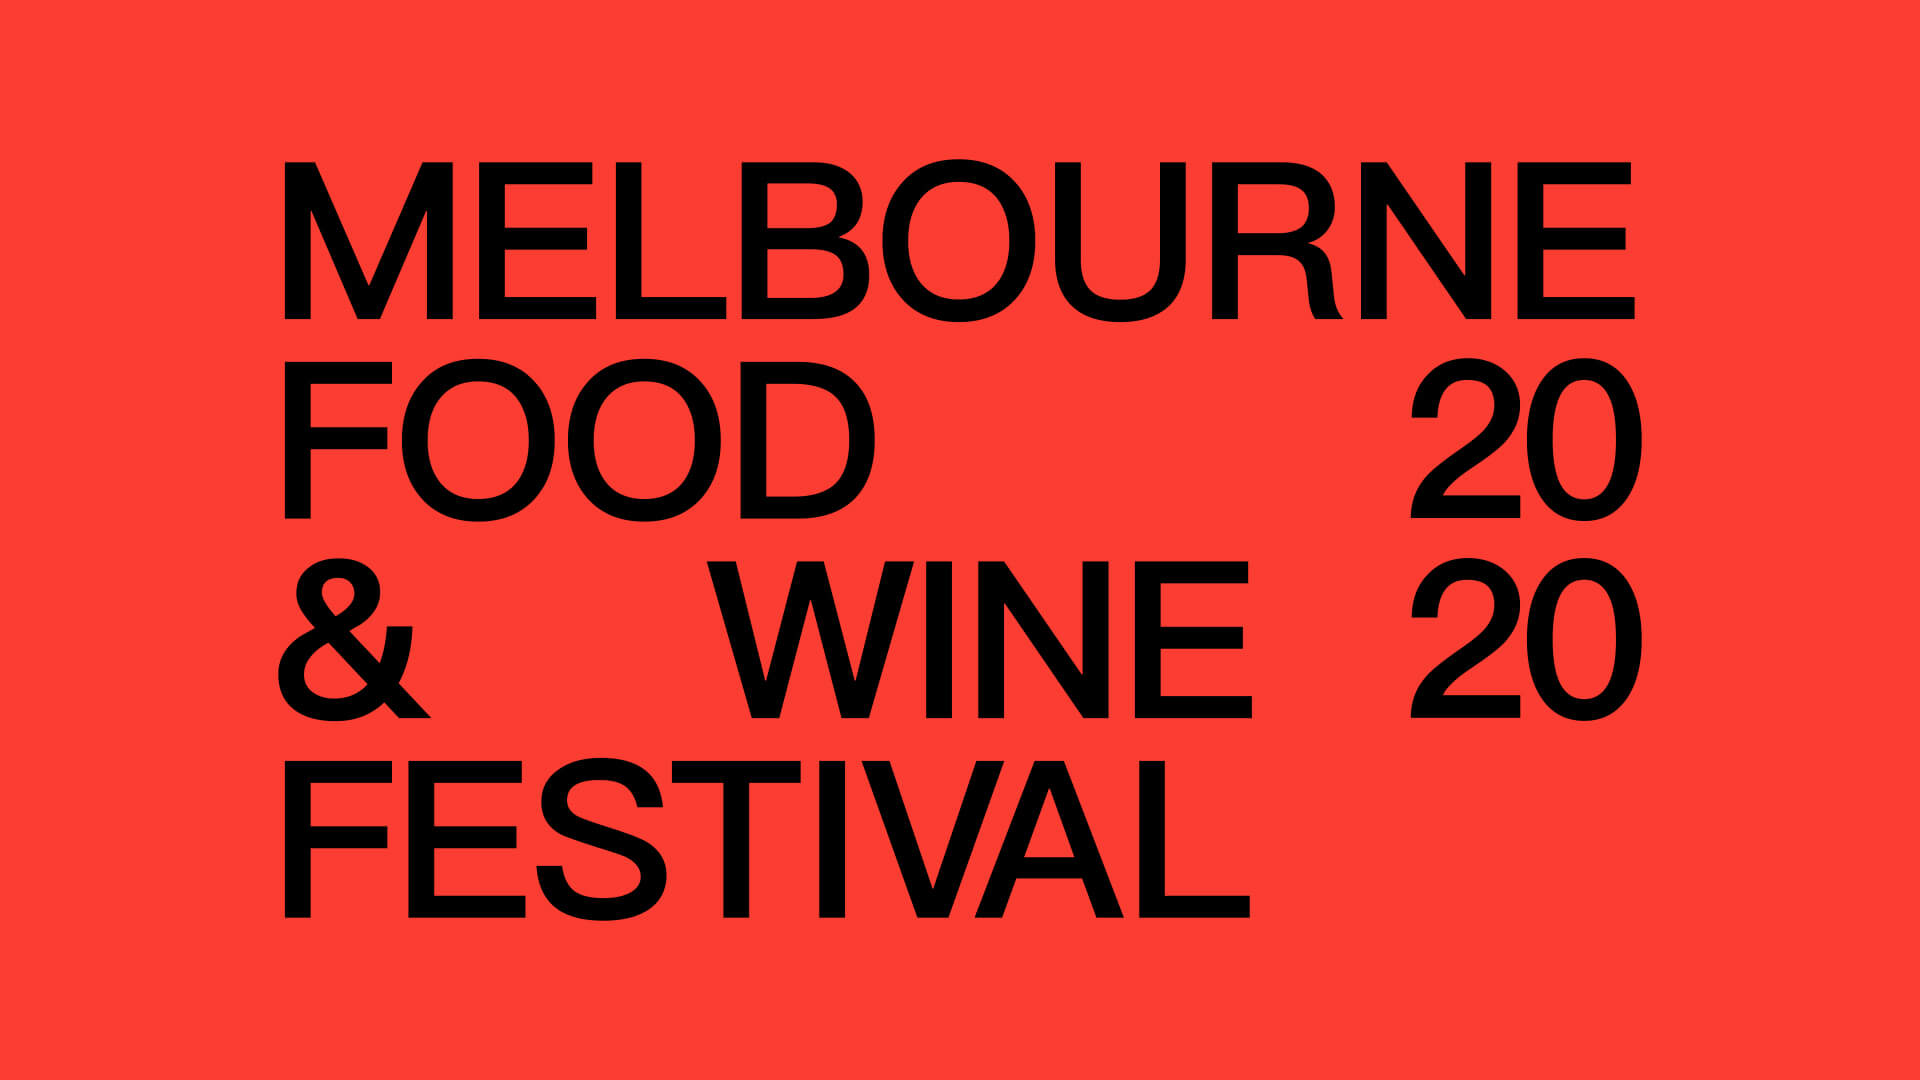 TS to launch 2020 Melbourne Food & Wine Festival brand Town Square